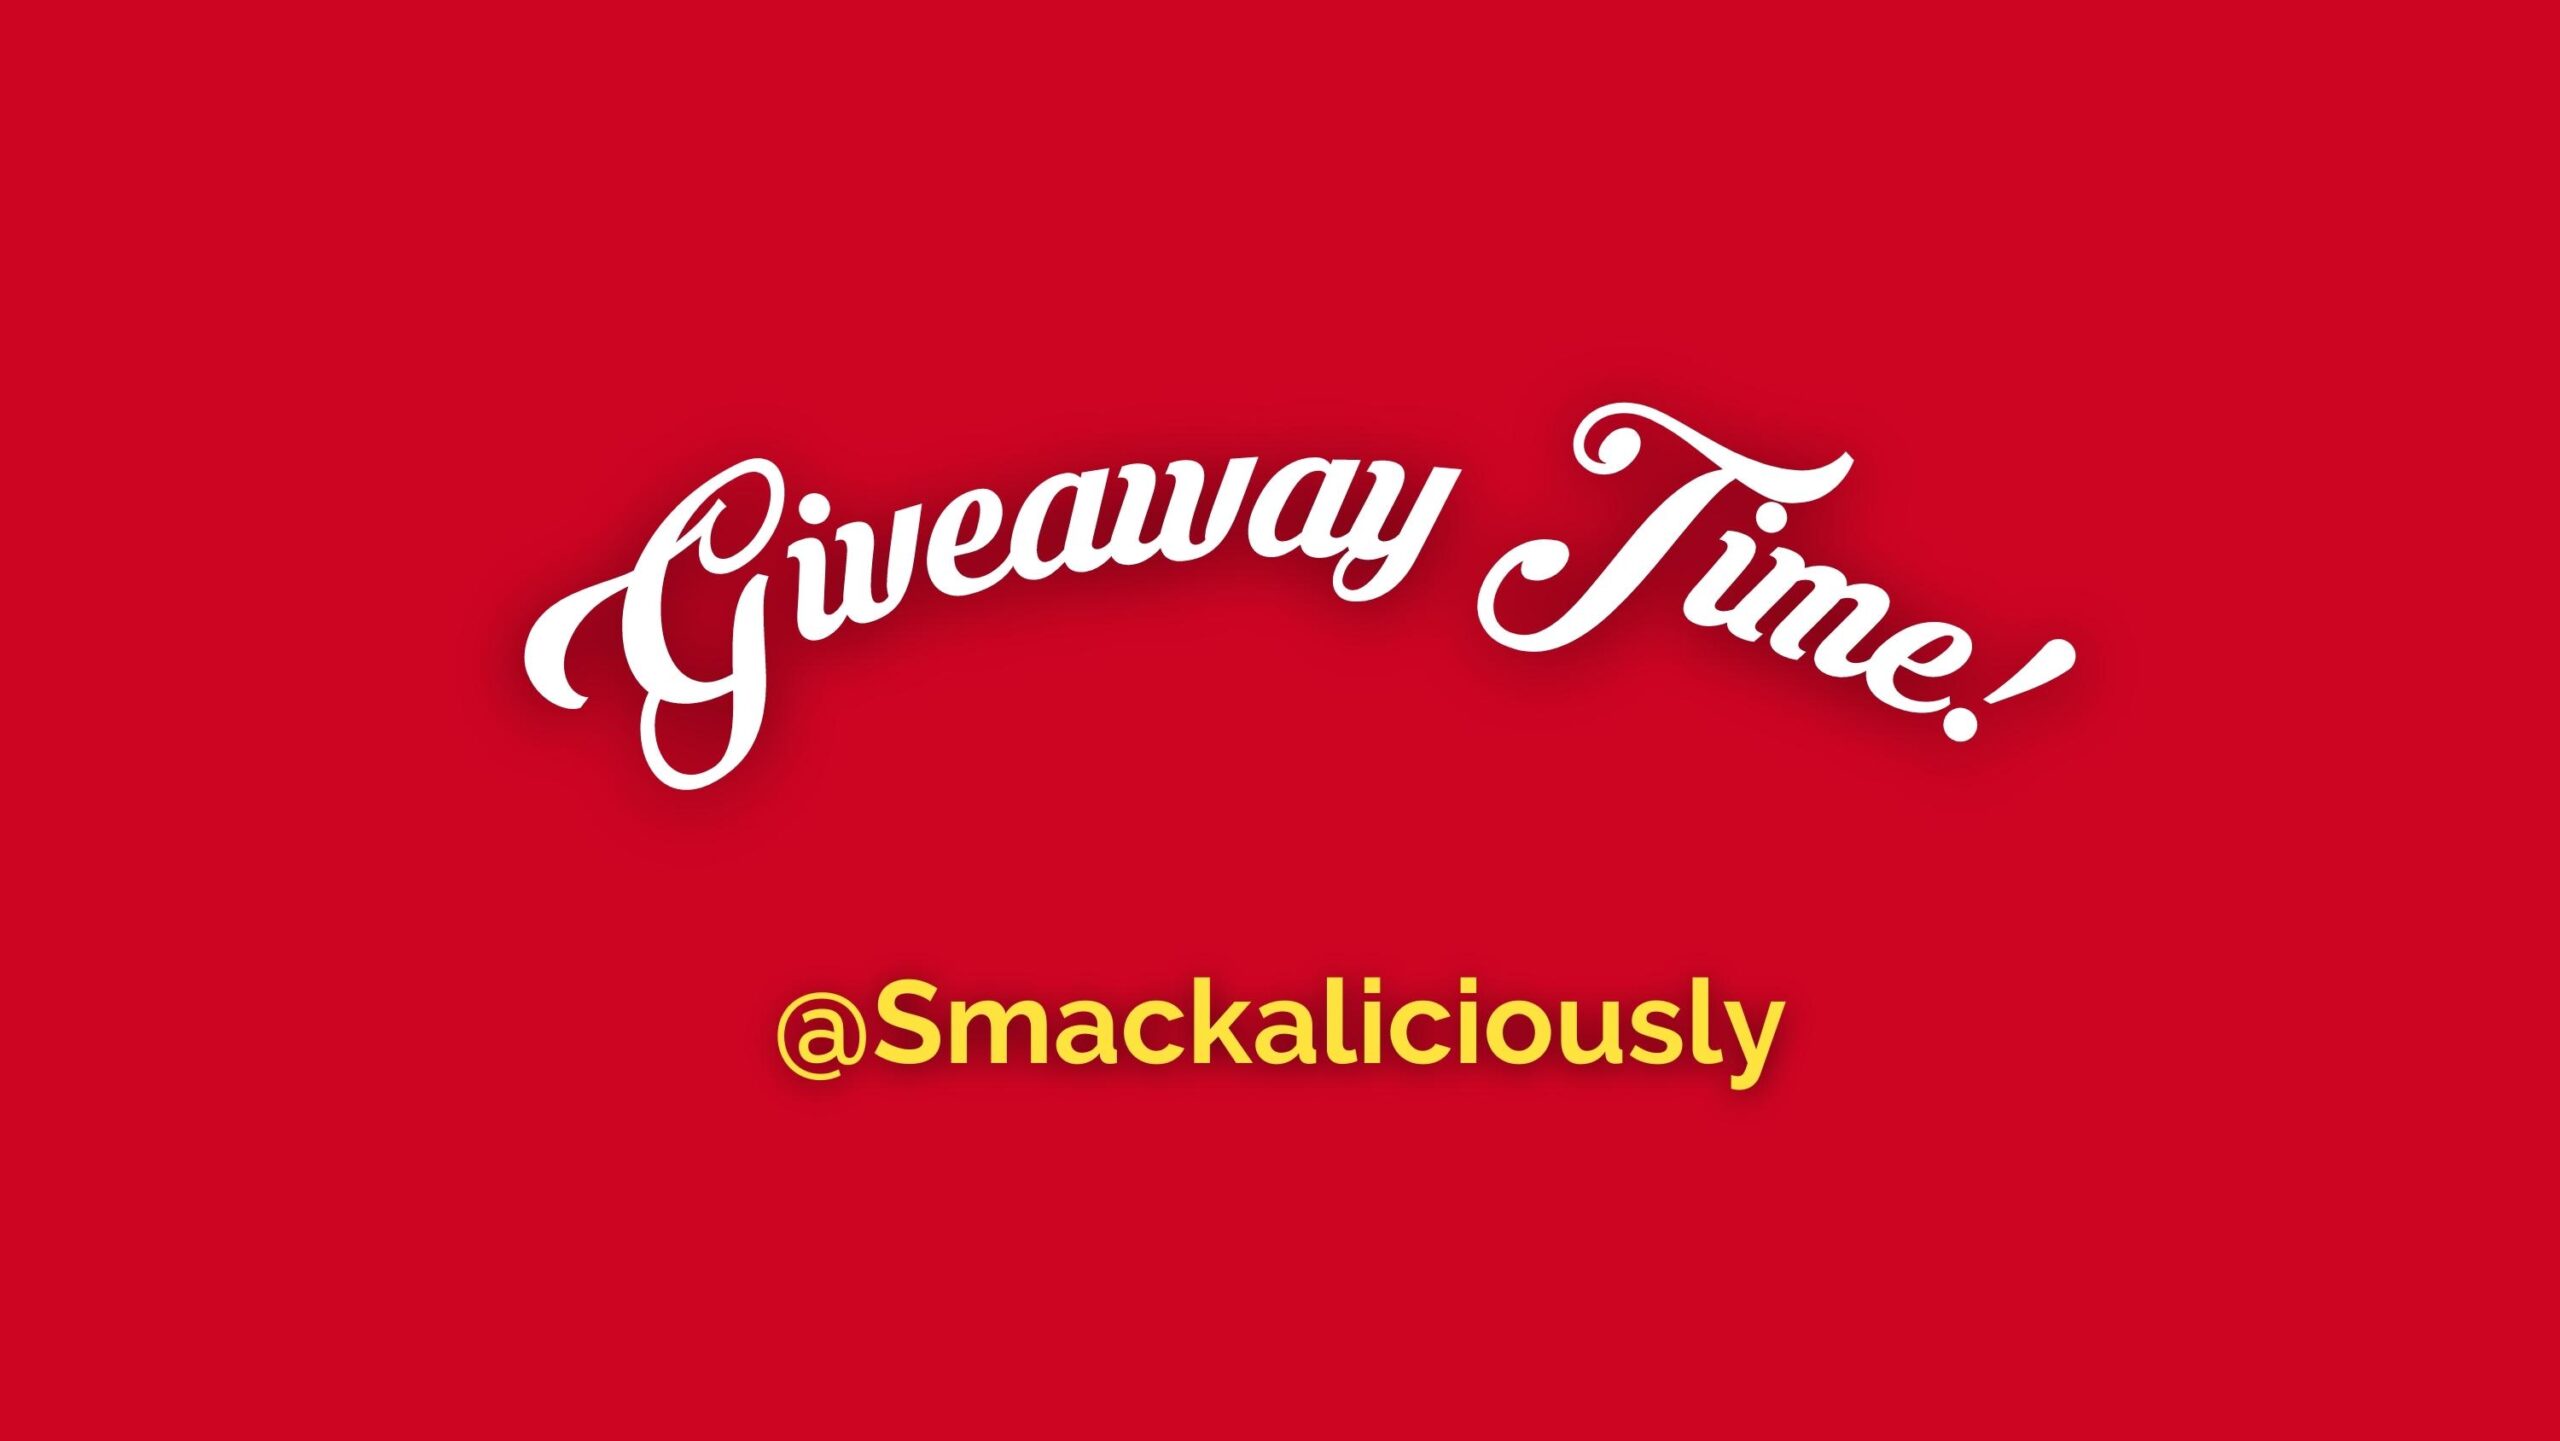 giveaway time @smackaliciously